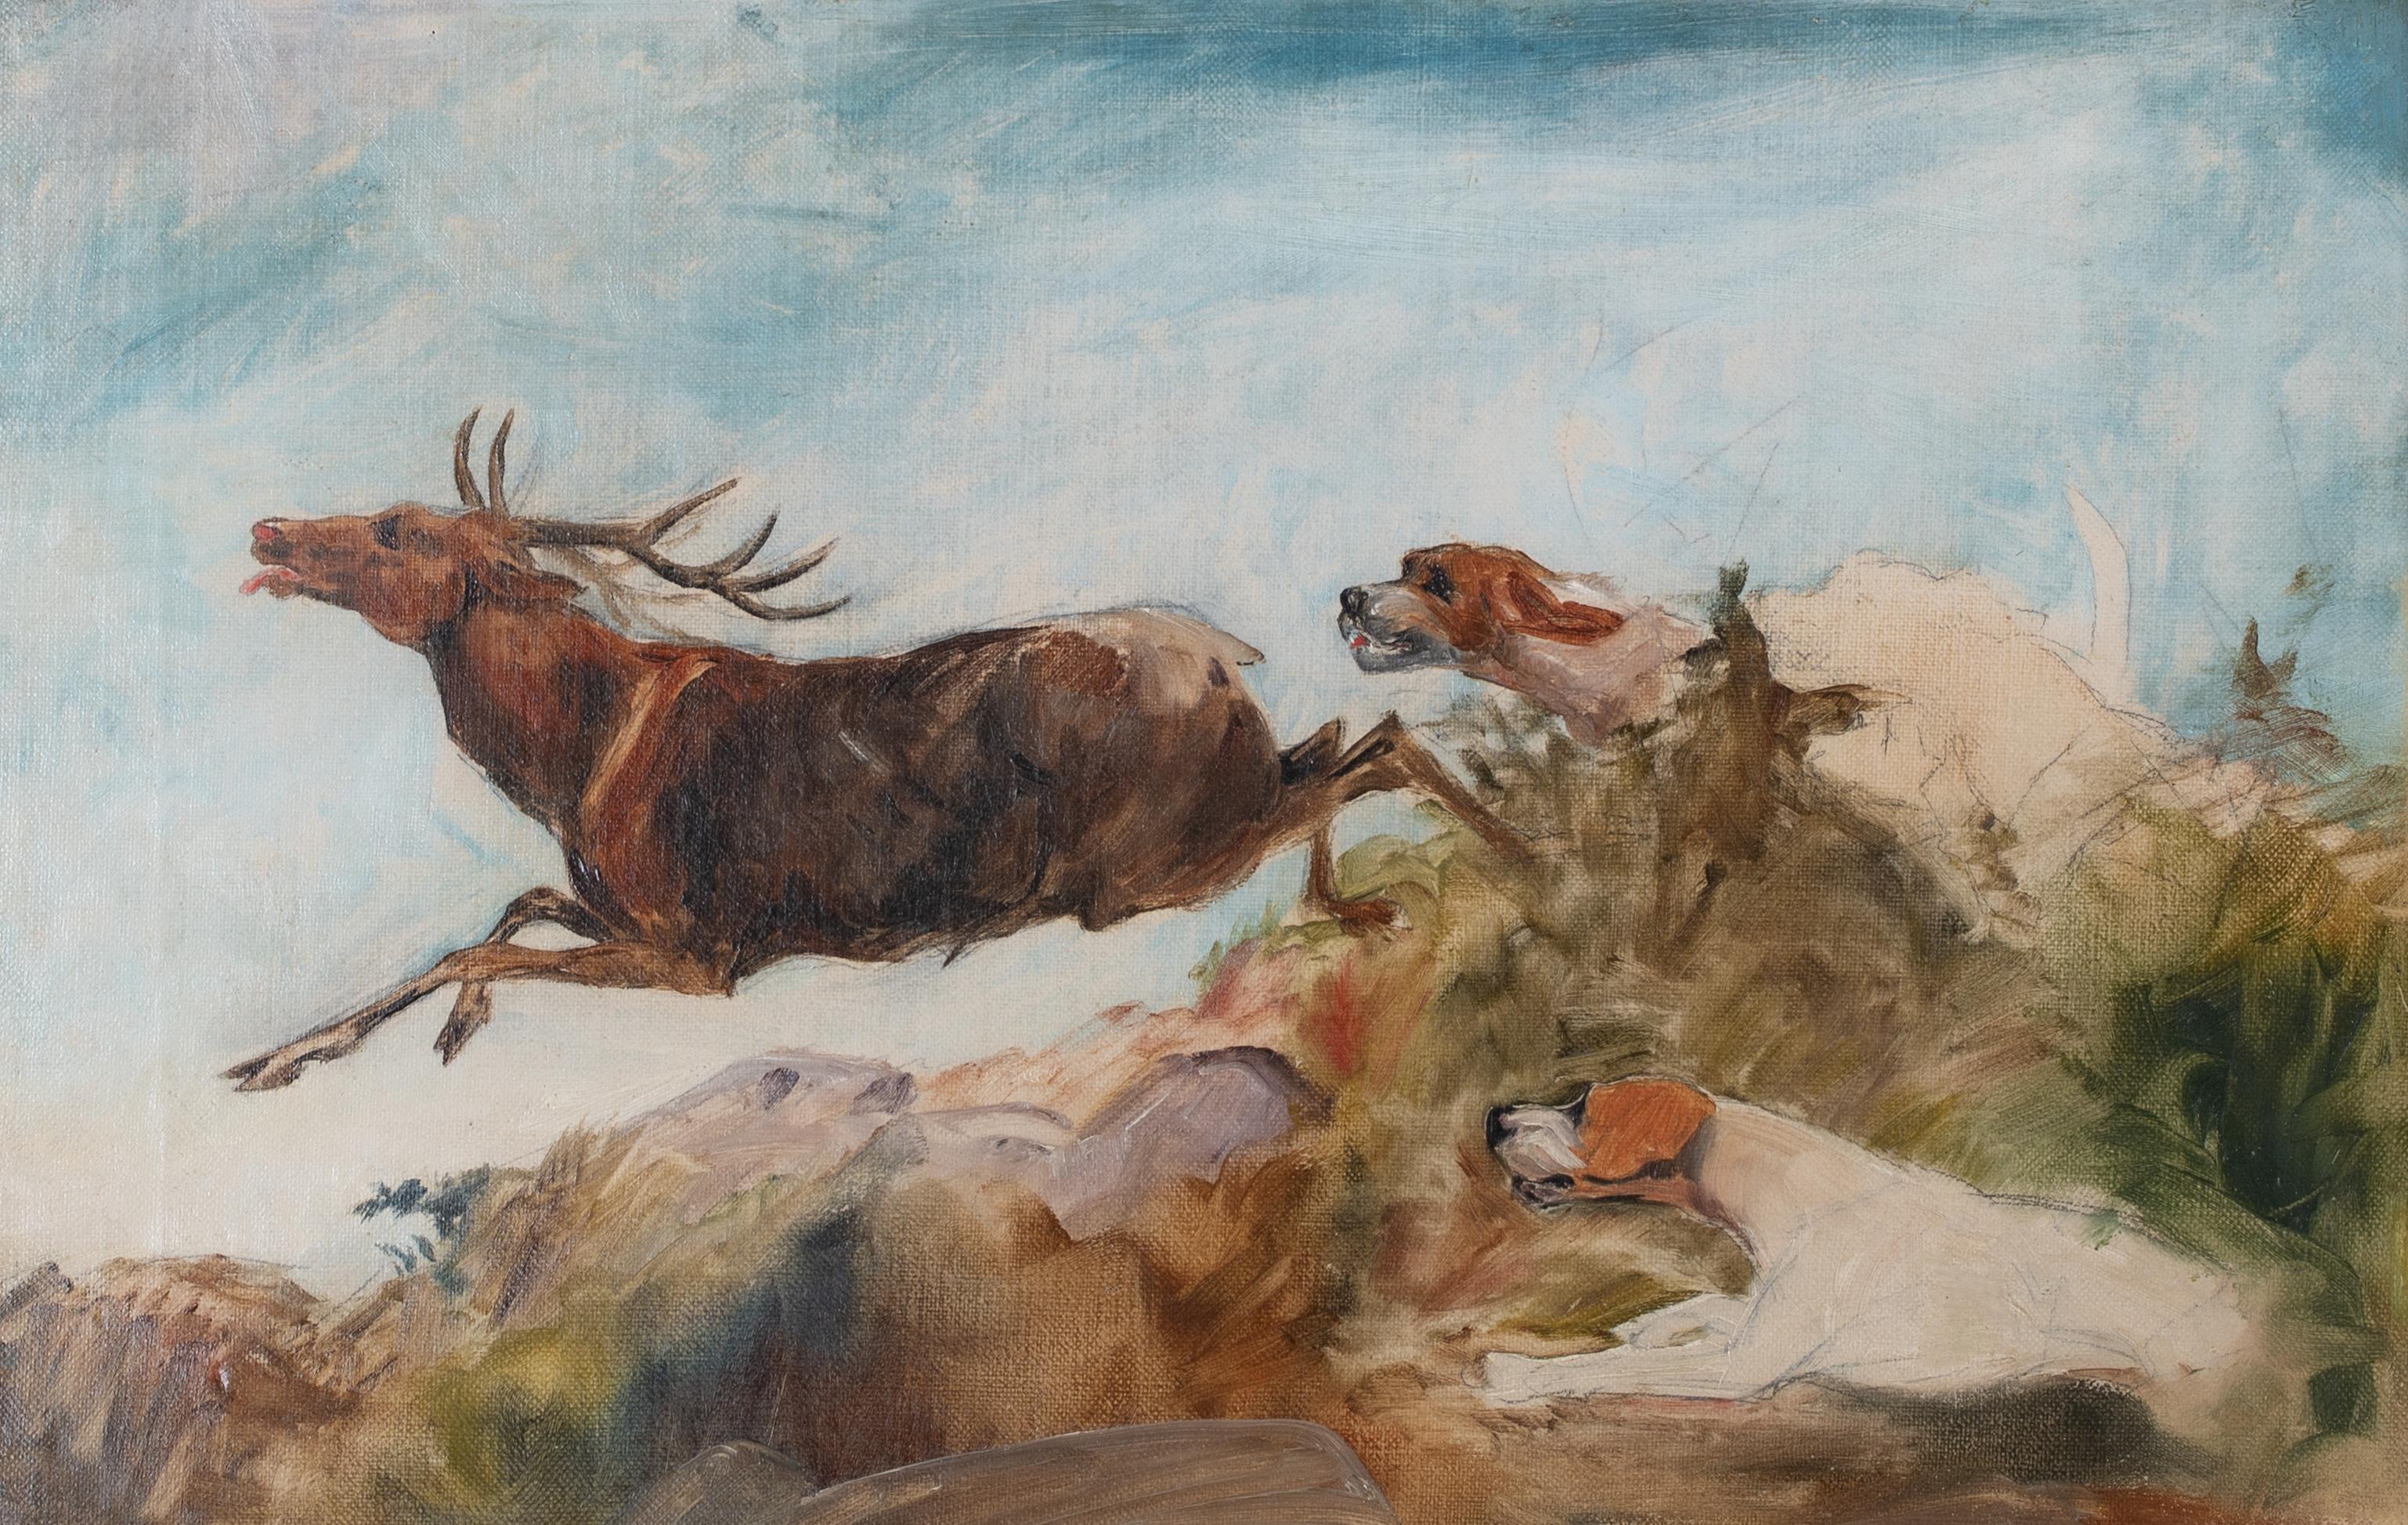 The Stag Hunt, 19th Century

by Cecil ALDIN (1870-1935) sales to $20,000

19th Century Stag Hunt scene with hounds in close pursuit, oil on canvas by Cecil Aldin. Good quality and condition example of the sporting painters work in its original